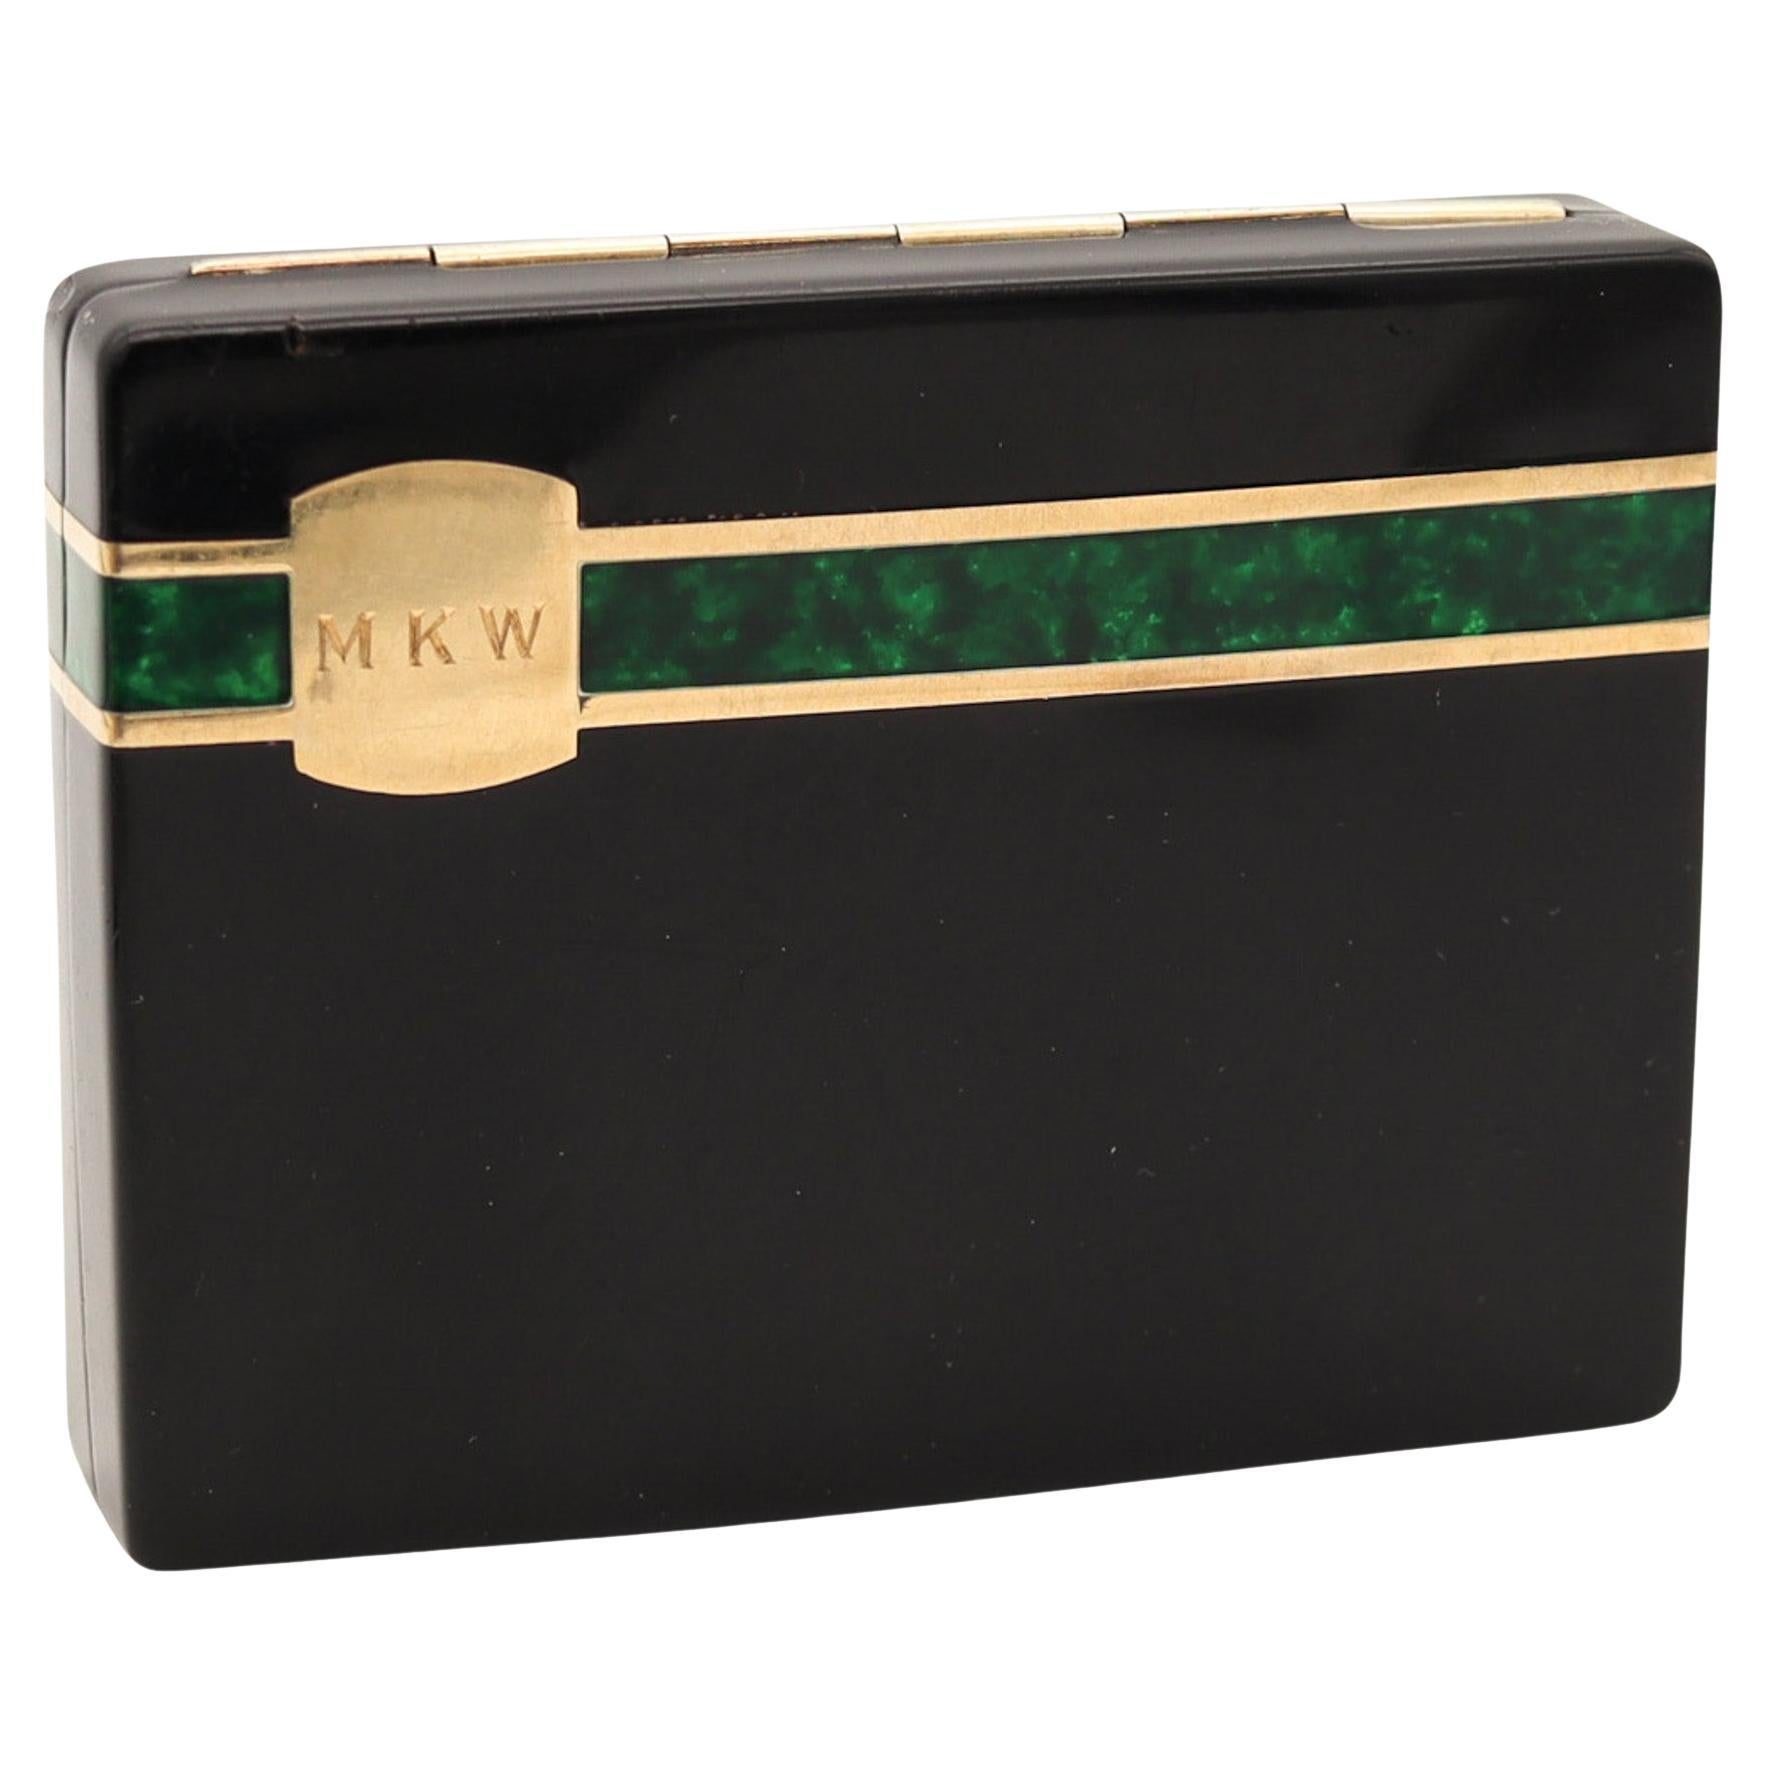 Wordley Allsopp & Bliss 1930 Art Deco Lacquered Box In 14Kt Gold And Sterling For Sale